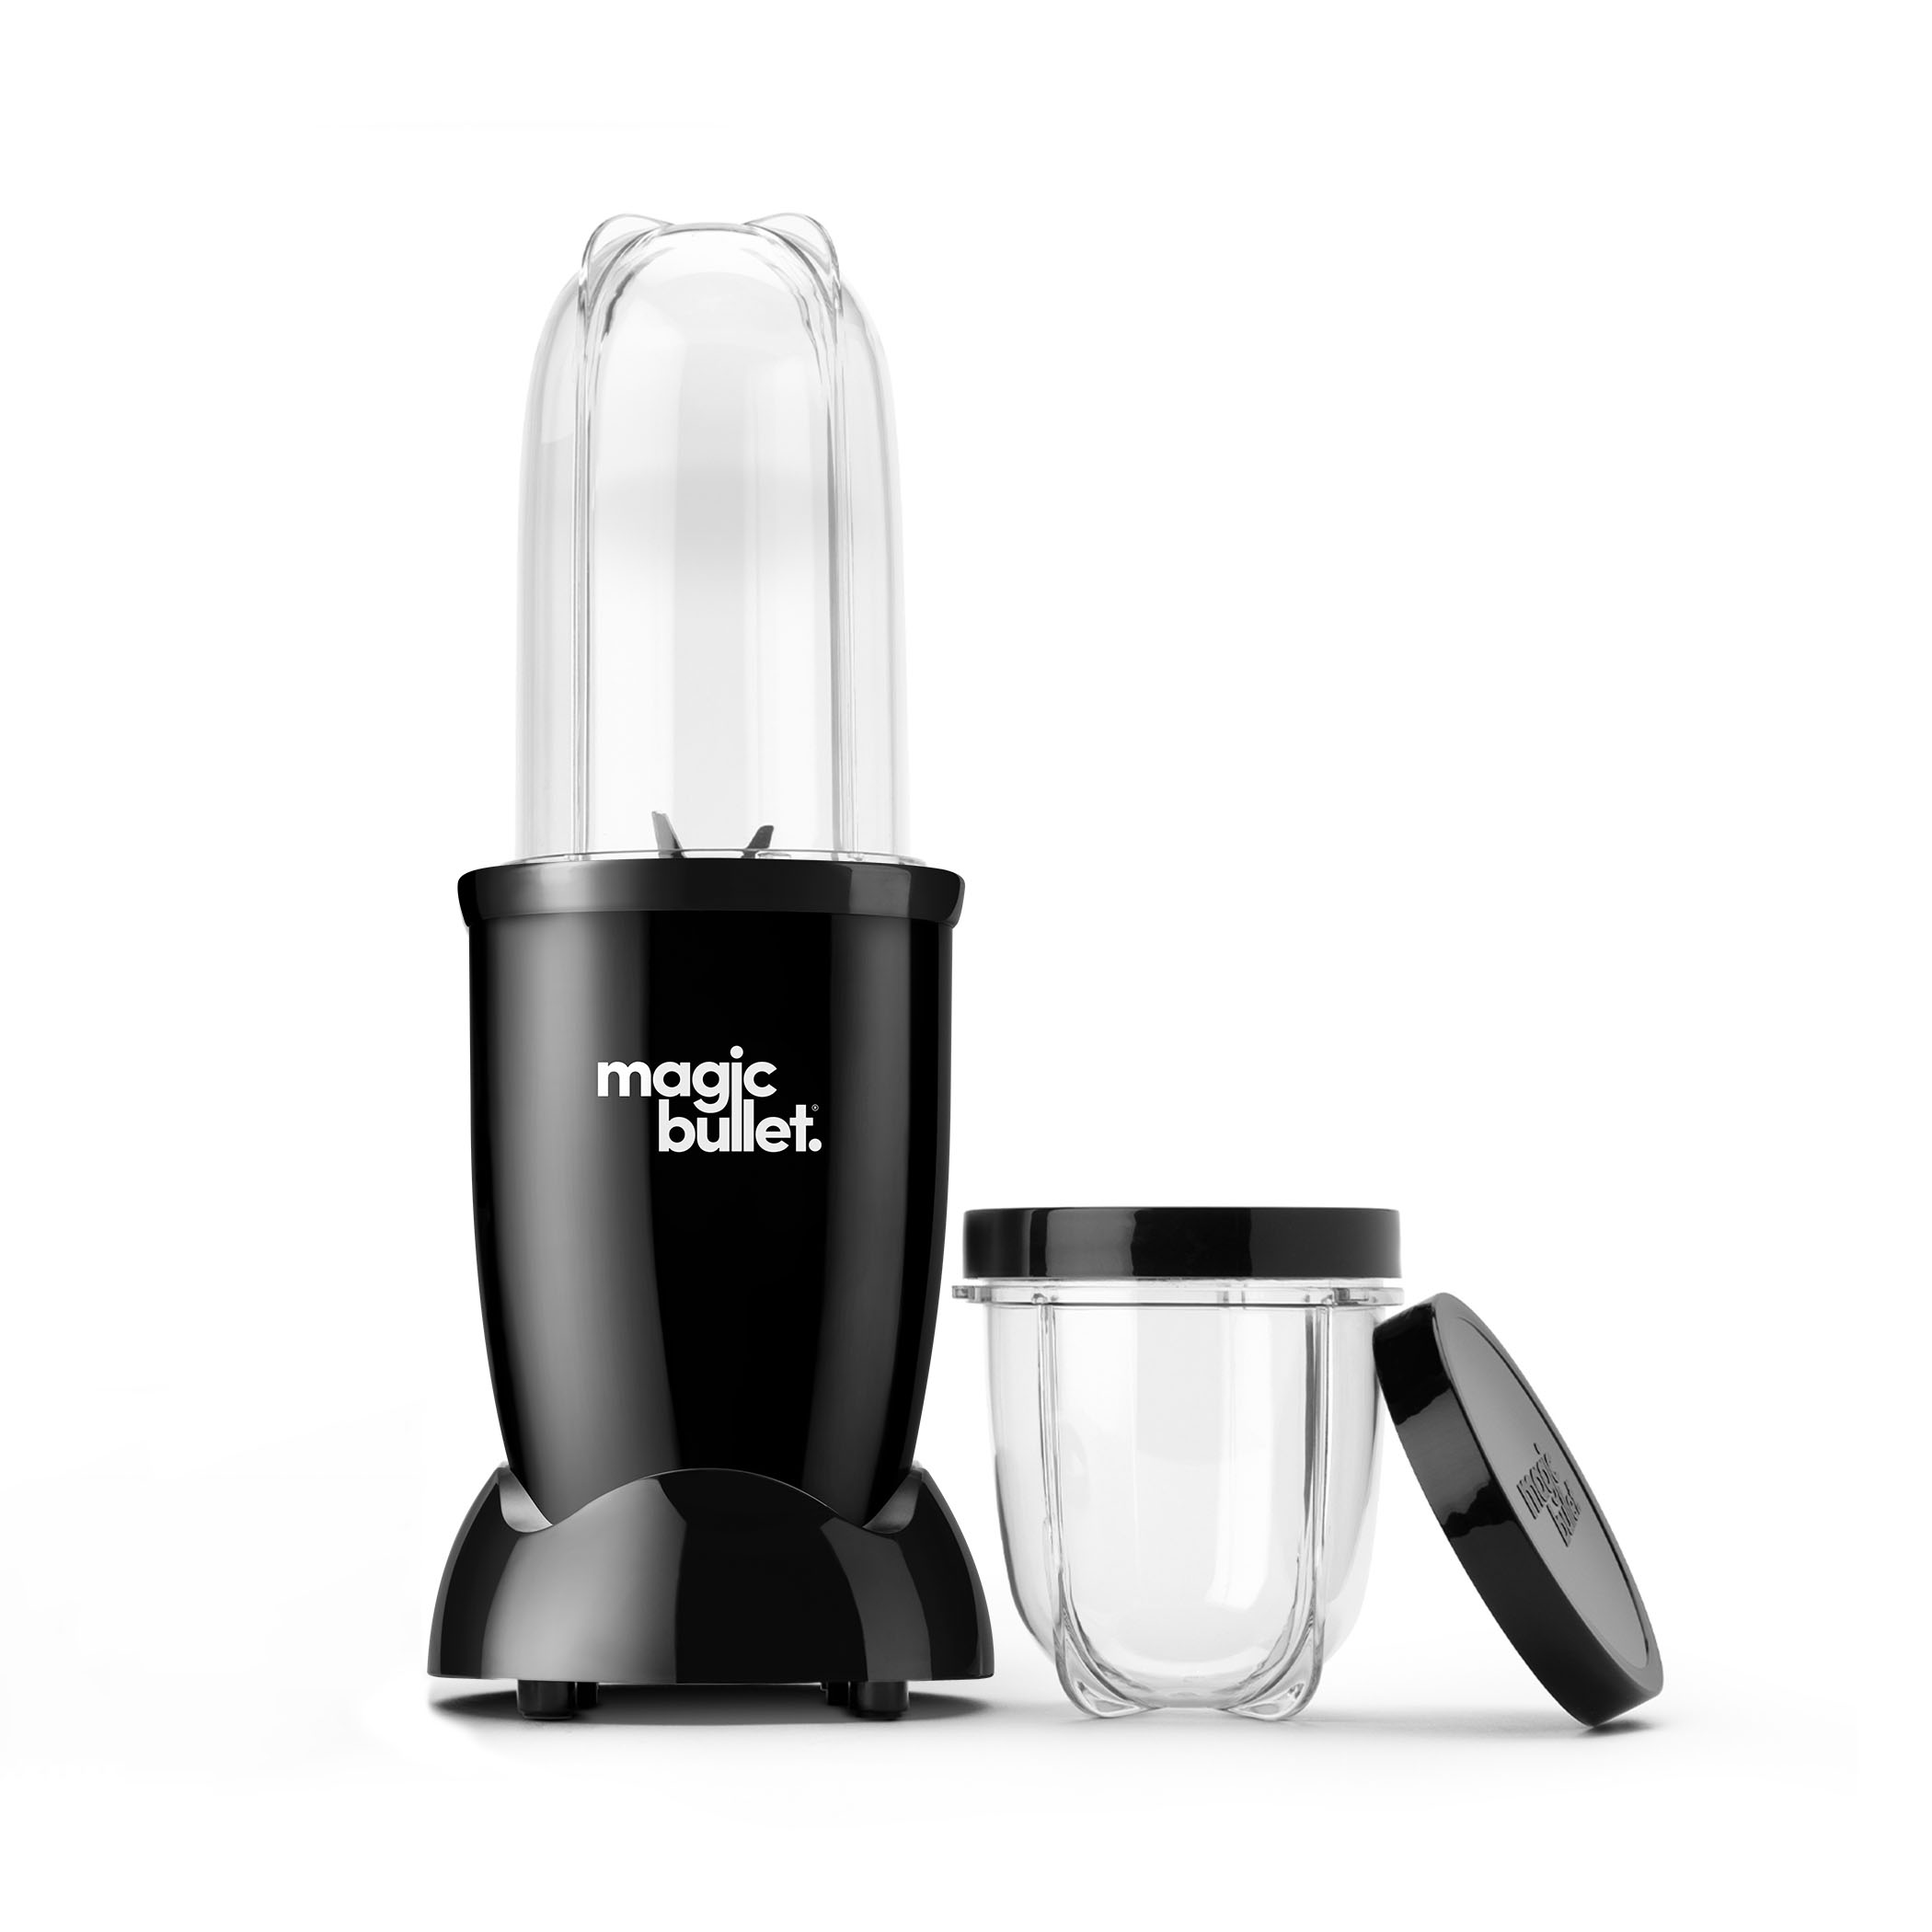 magic bullet 7-Piece 250 Watts Personal Blender 18 oz. MBR-0701AK, All Black - image 2 of 9